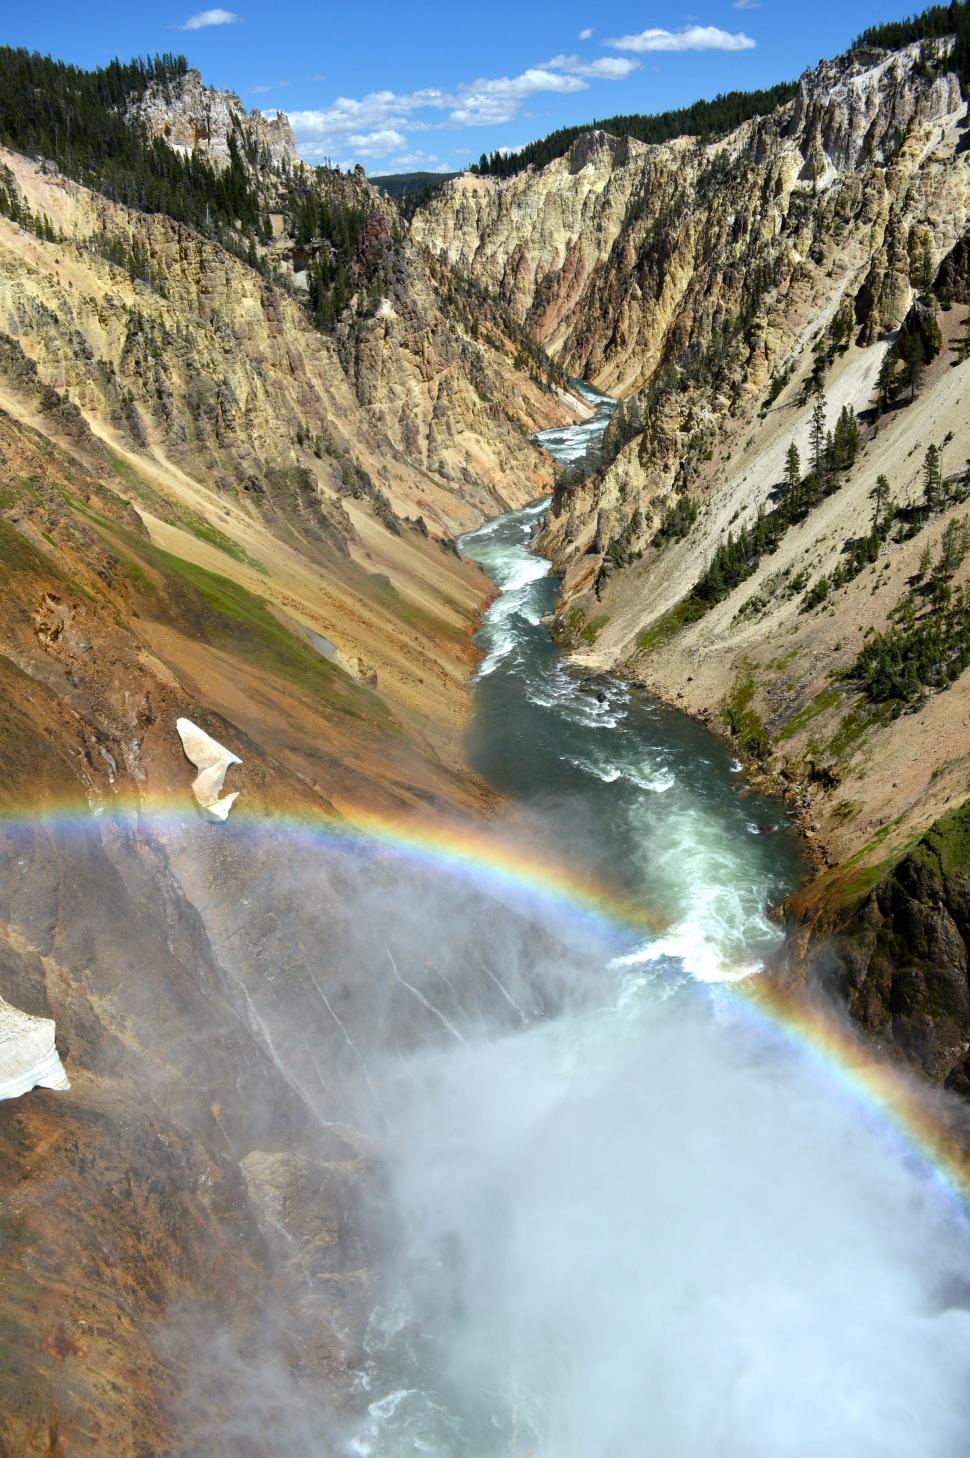 Free Image of Rainbow In The Sky Above River And Mountains 